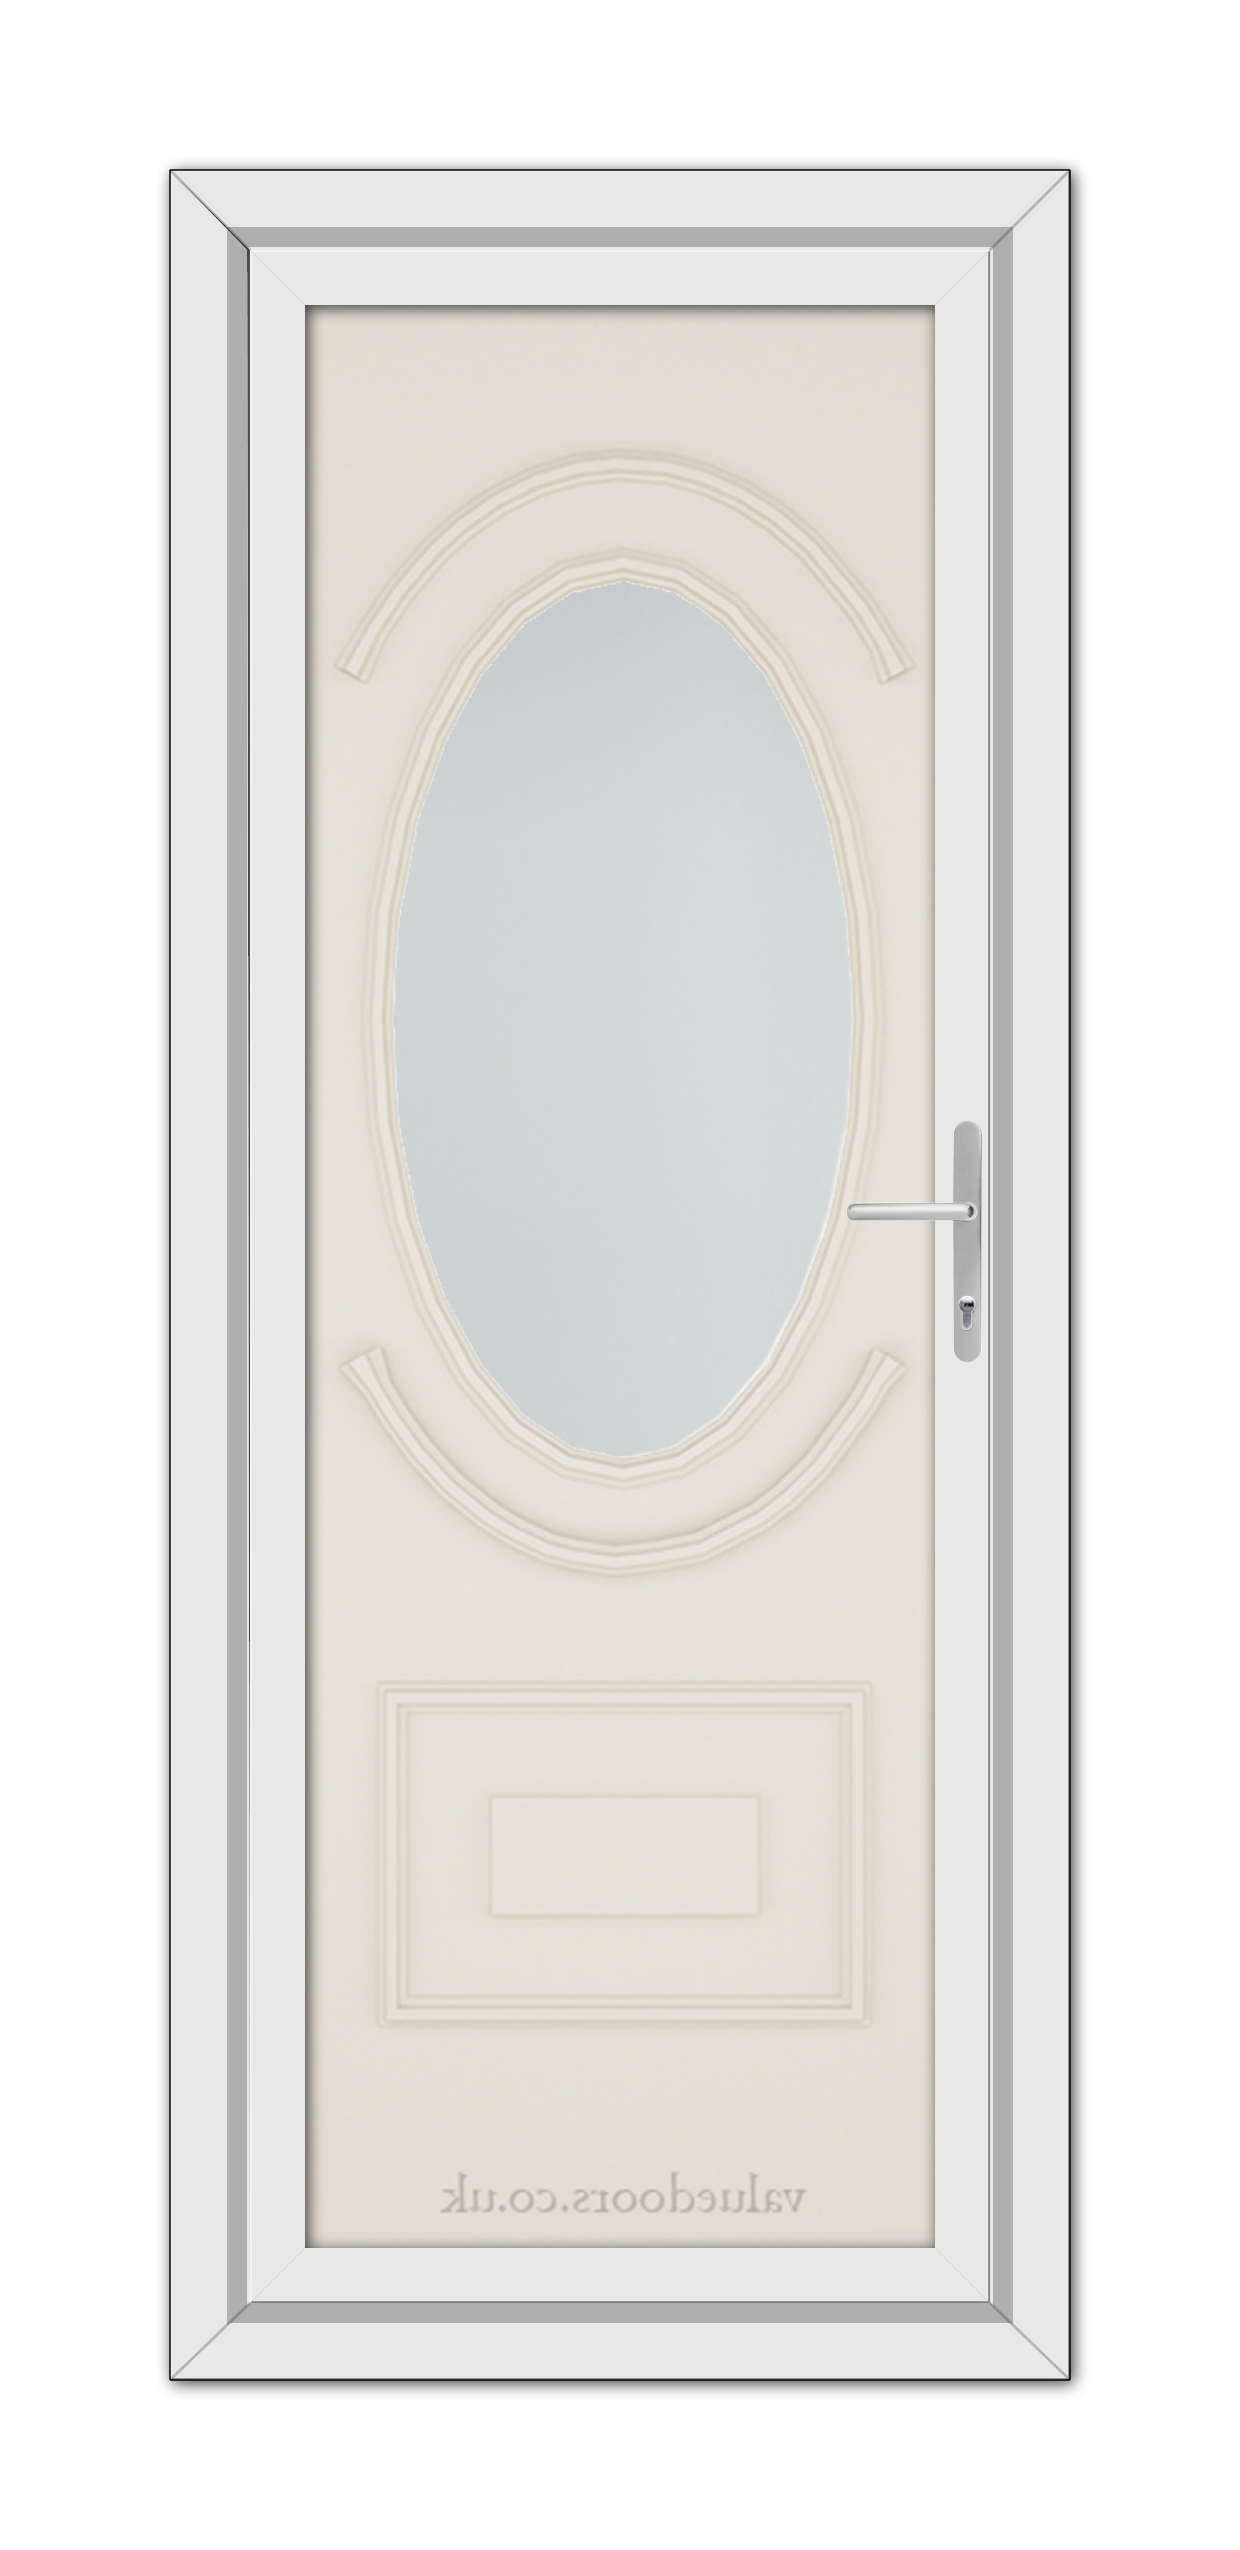 A vertical image of a closed Cream Richmond uPVC Door with a frosted oval glass panel at the center and a handle on the left side, set in a simple frame.